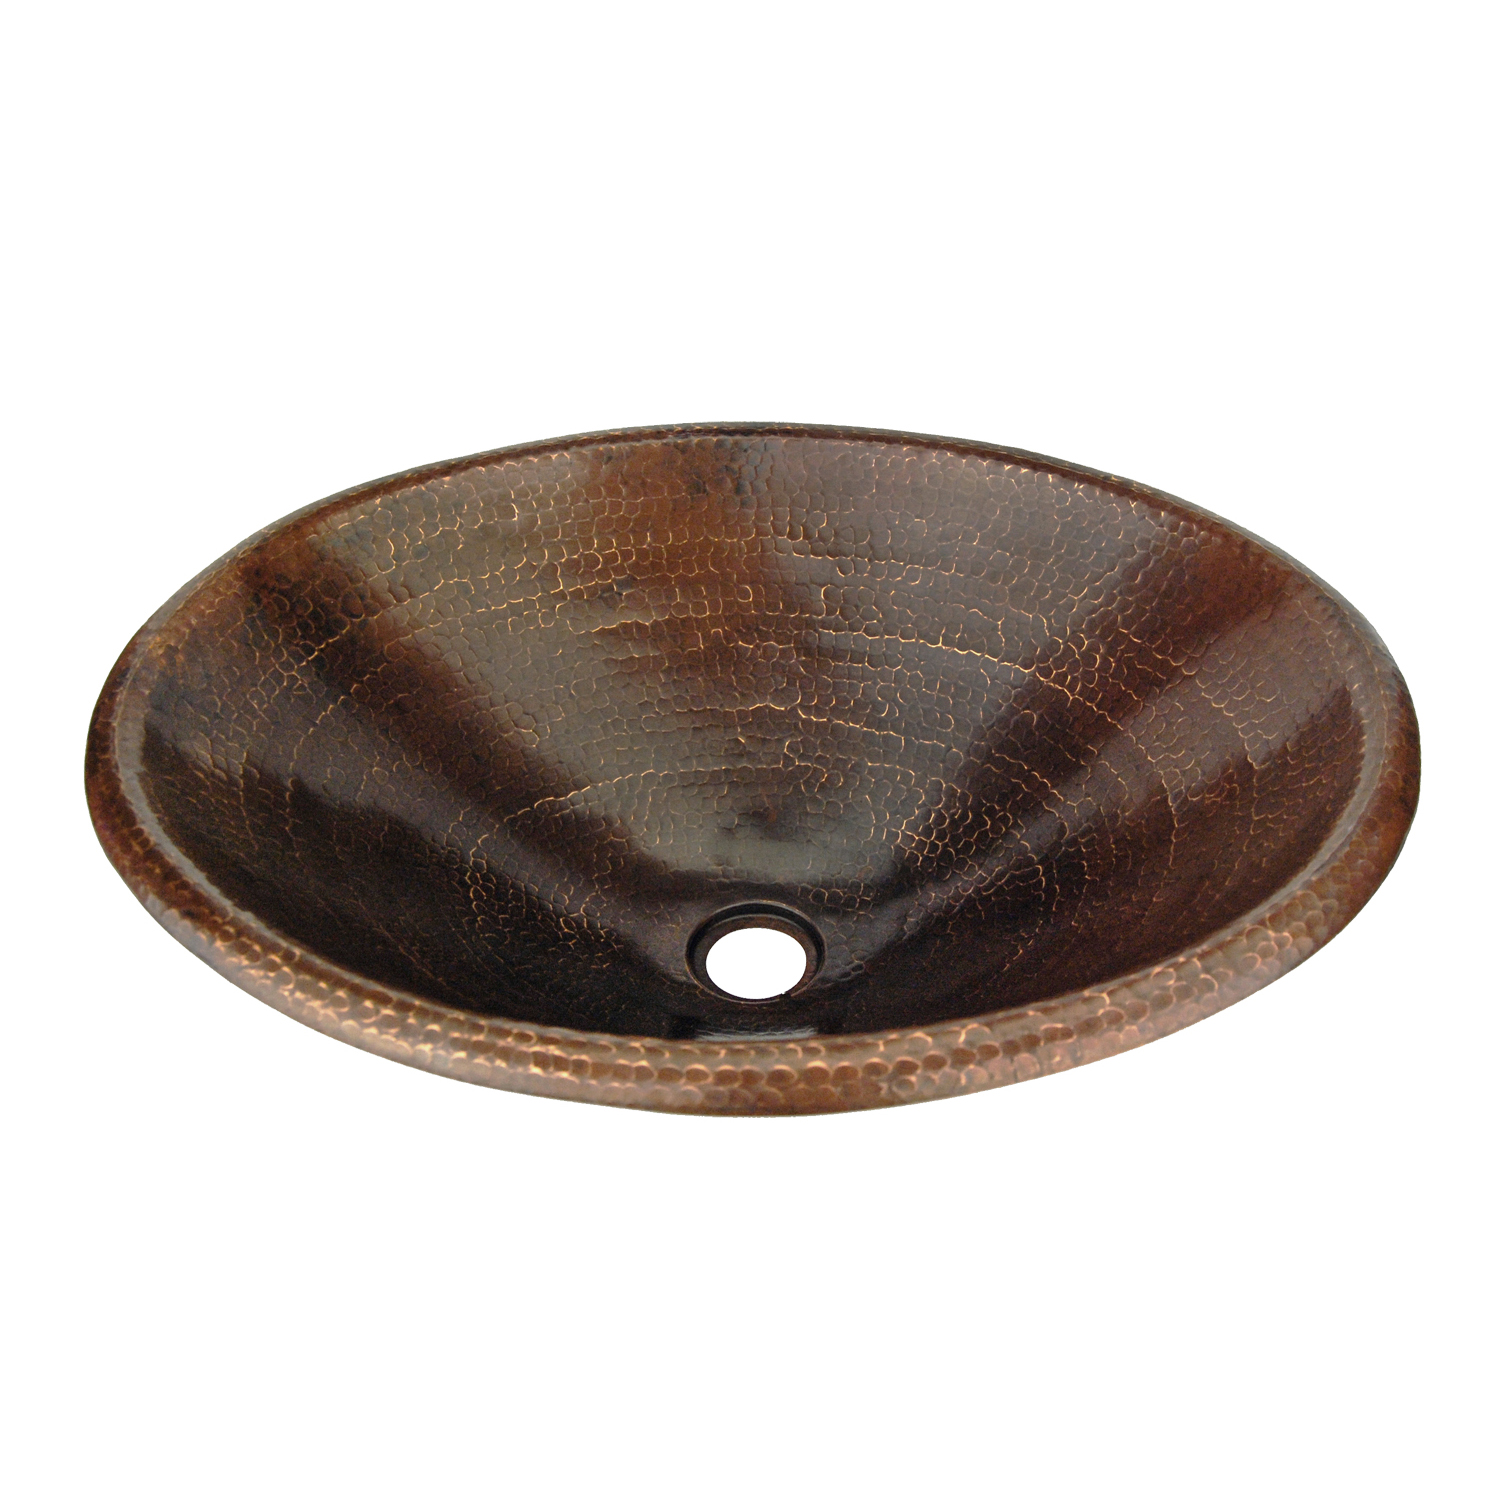 Premier Copper Products Master Bath Oval Self Rimming Hammered Copper Bathroom Sink - Oil Rubbed Bronze